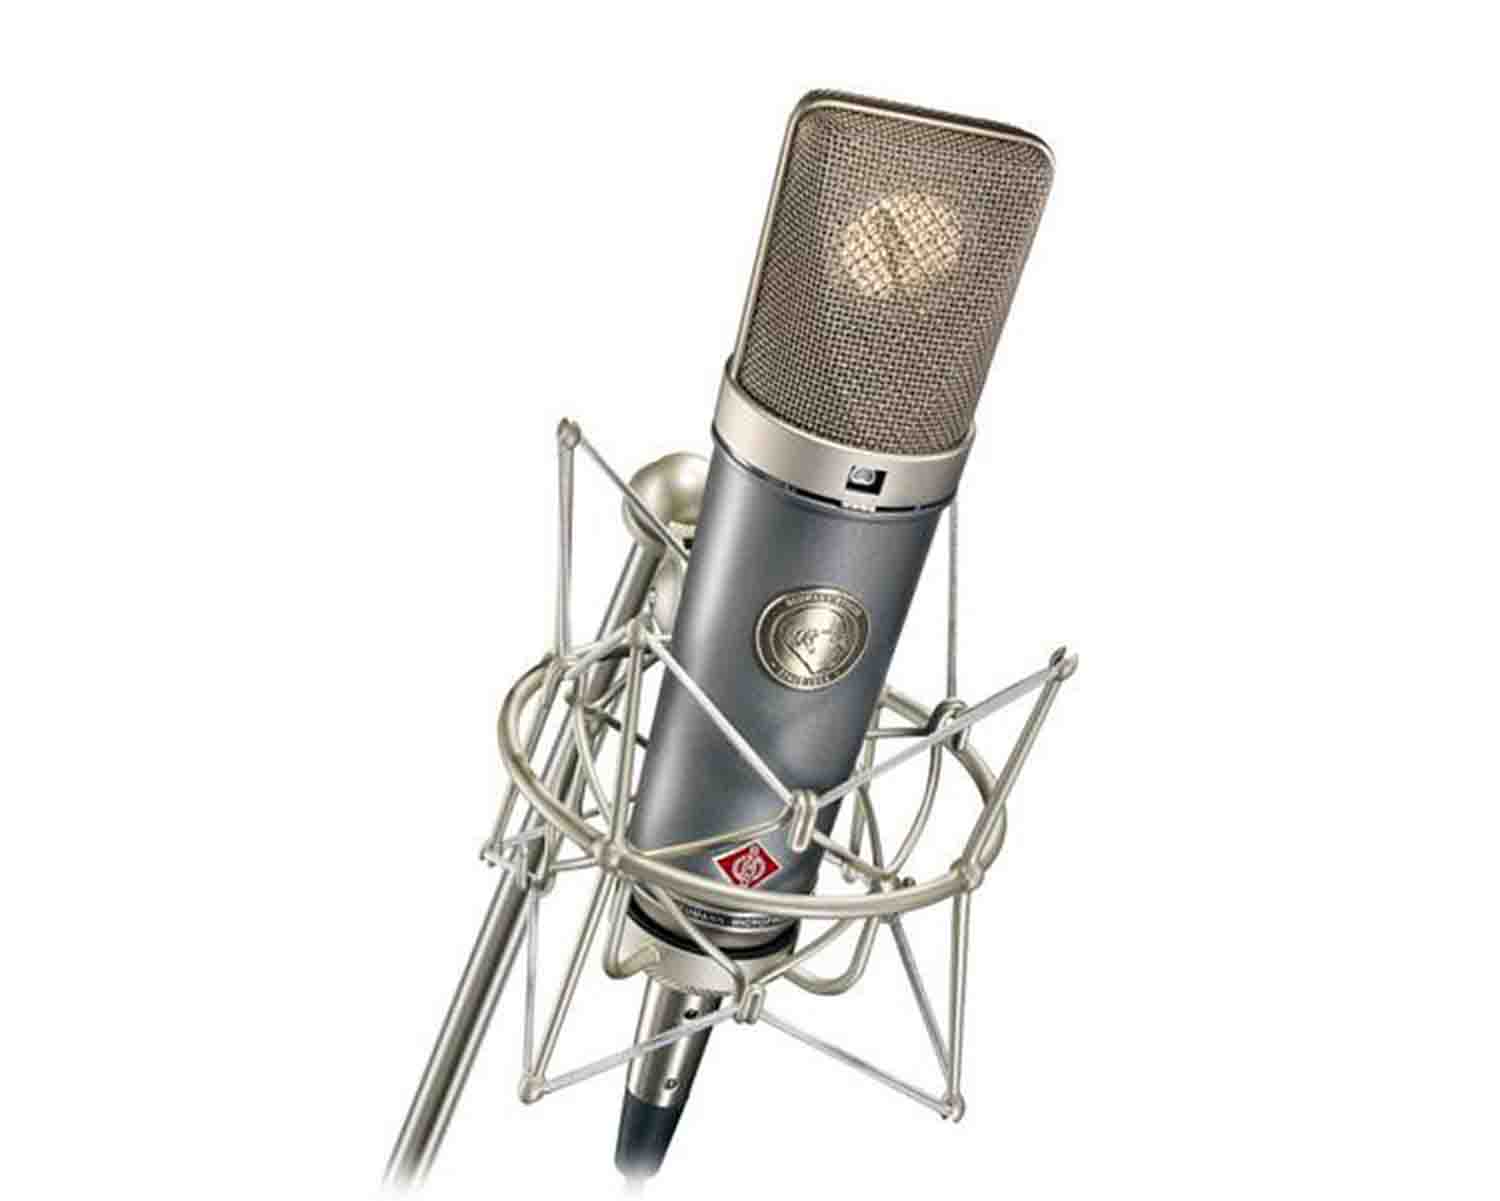 Neumann TLM 67 SET Z Large-Diaphragm Multipattern Condenser Microphone with Accessories - Hollywood DJ